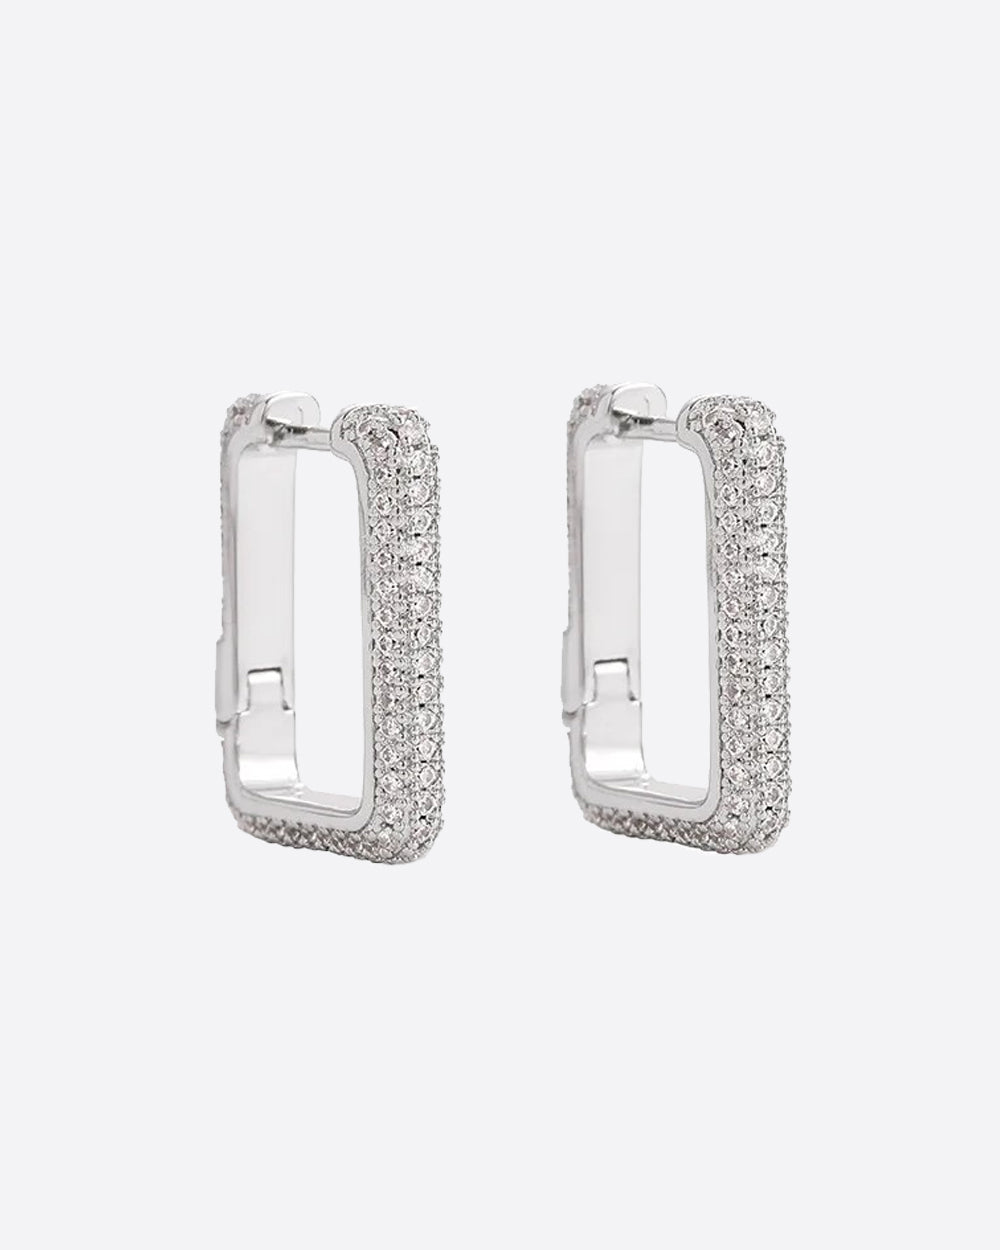 ICED CHUNKY HOOPS EARRINGS. - WHITE GOLD - Drippy Amsterdam